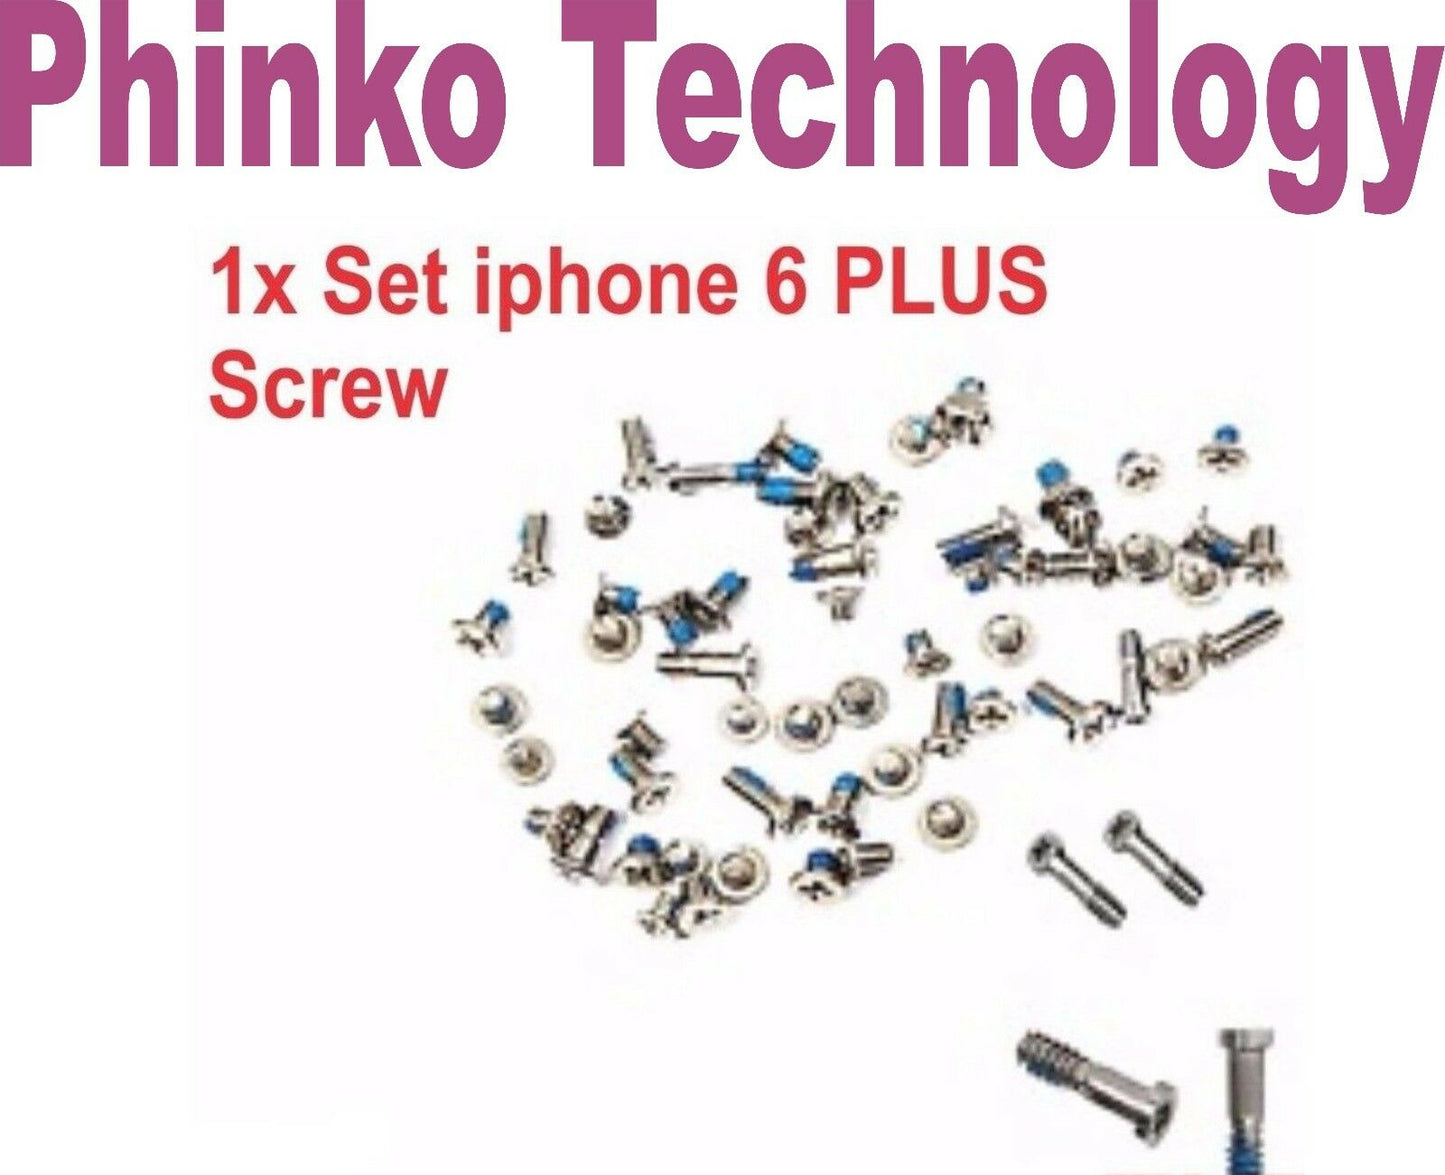 Full Screws Set for iphone 6 Plus with  2 Bottom Screws for  iphone 6 plus 5.5"